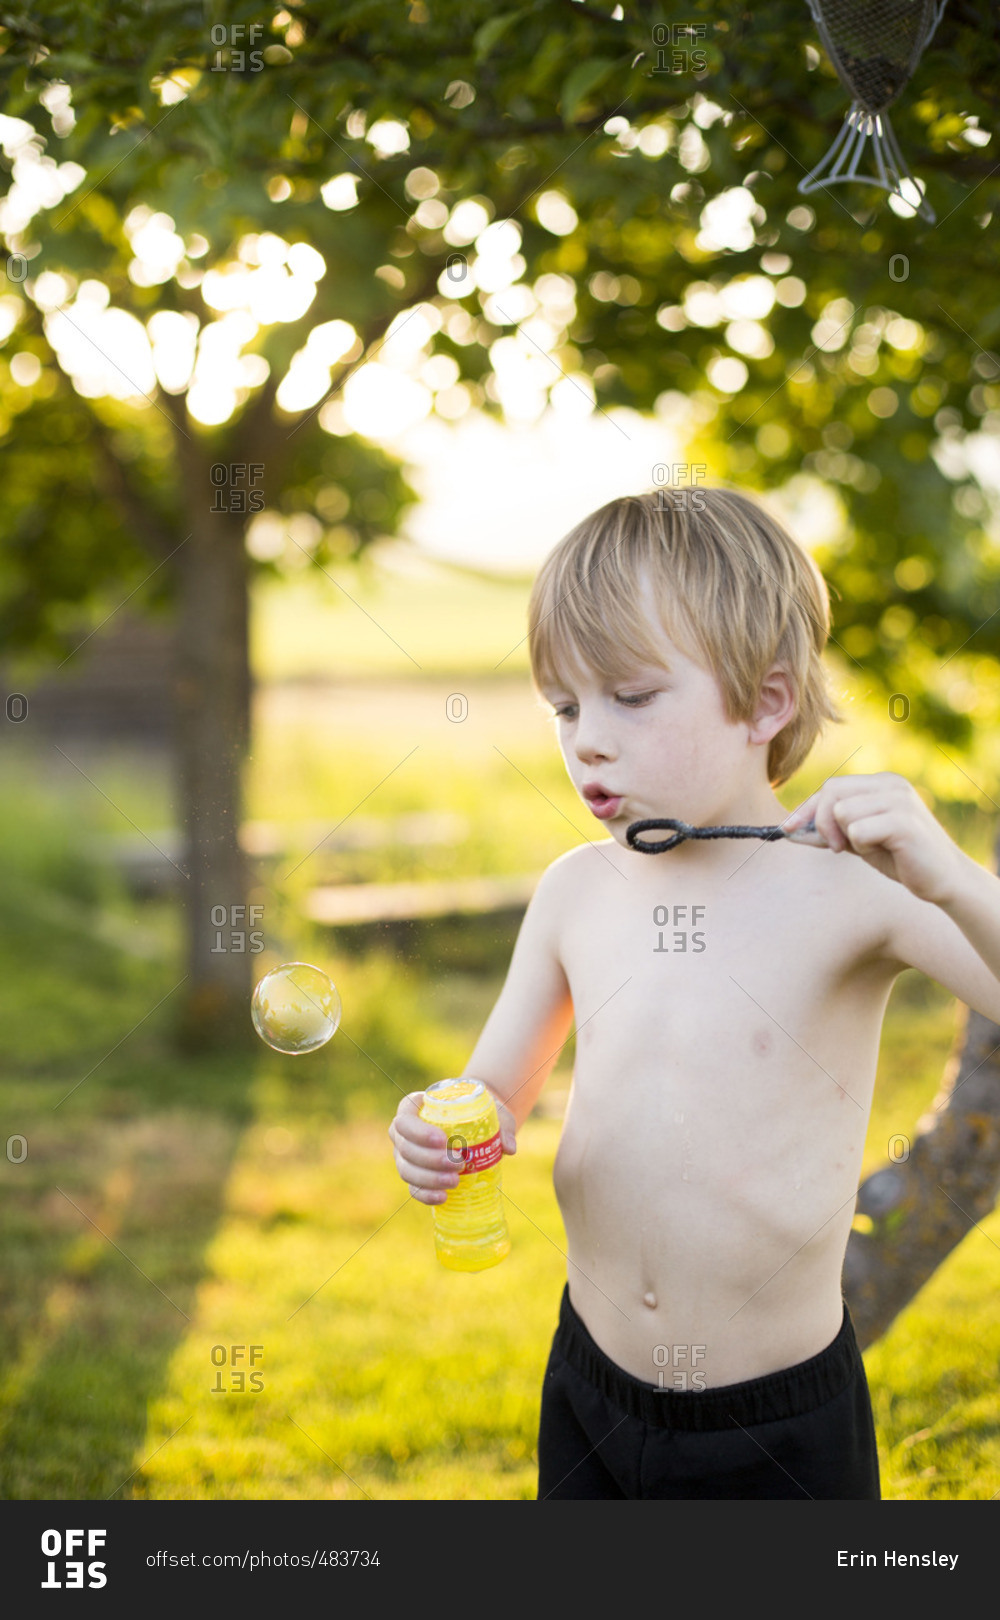 Shirtless boy blowing bubbles in backyard at dusk stock photo - OFFSET